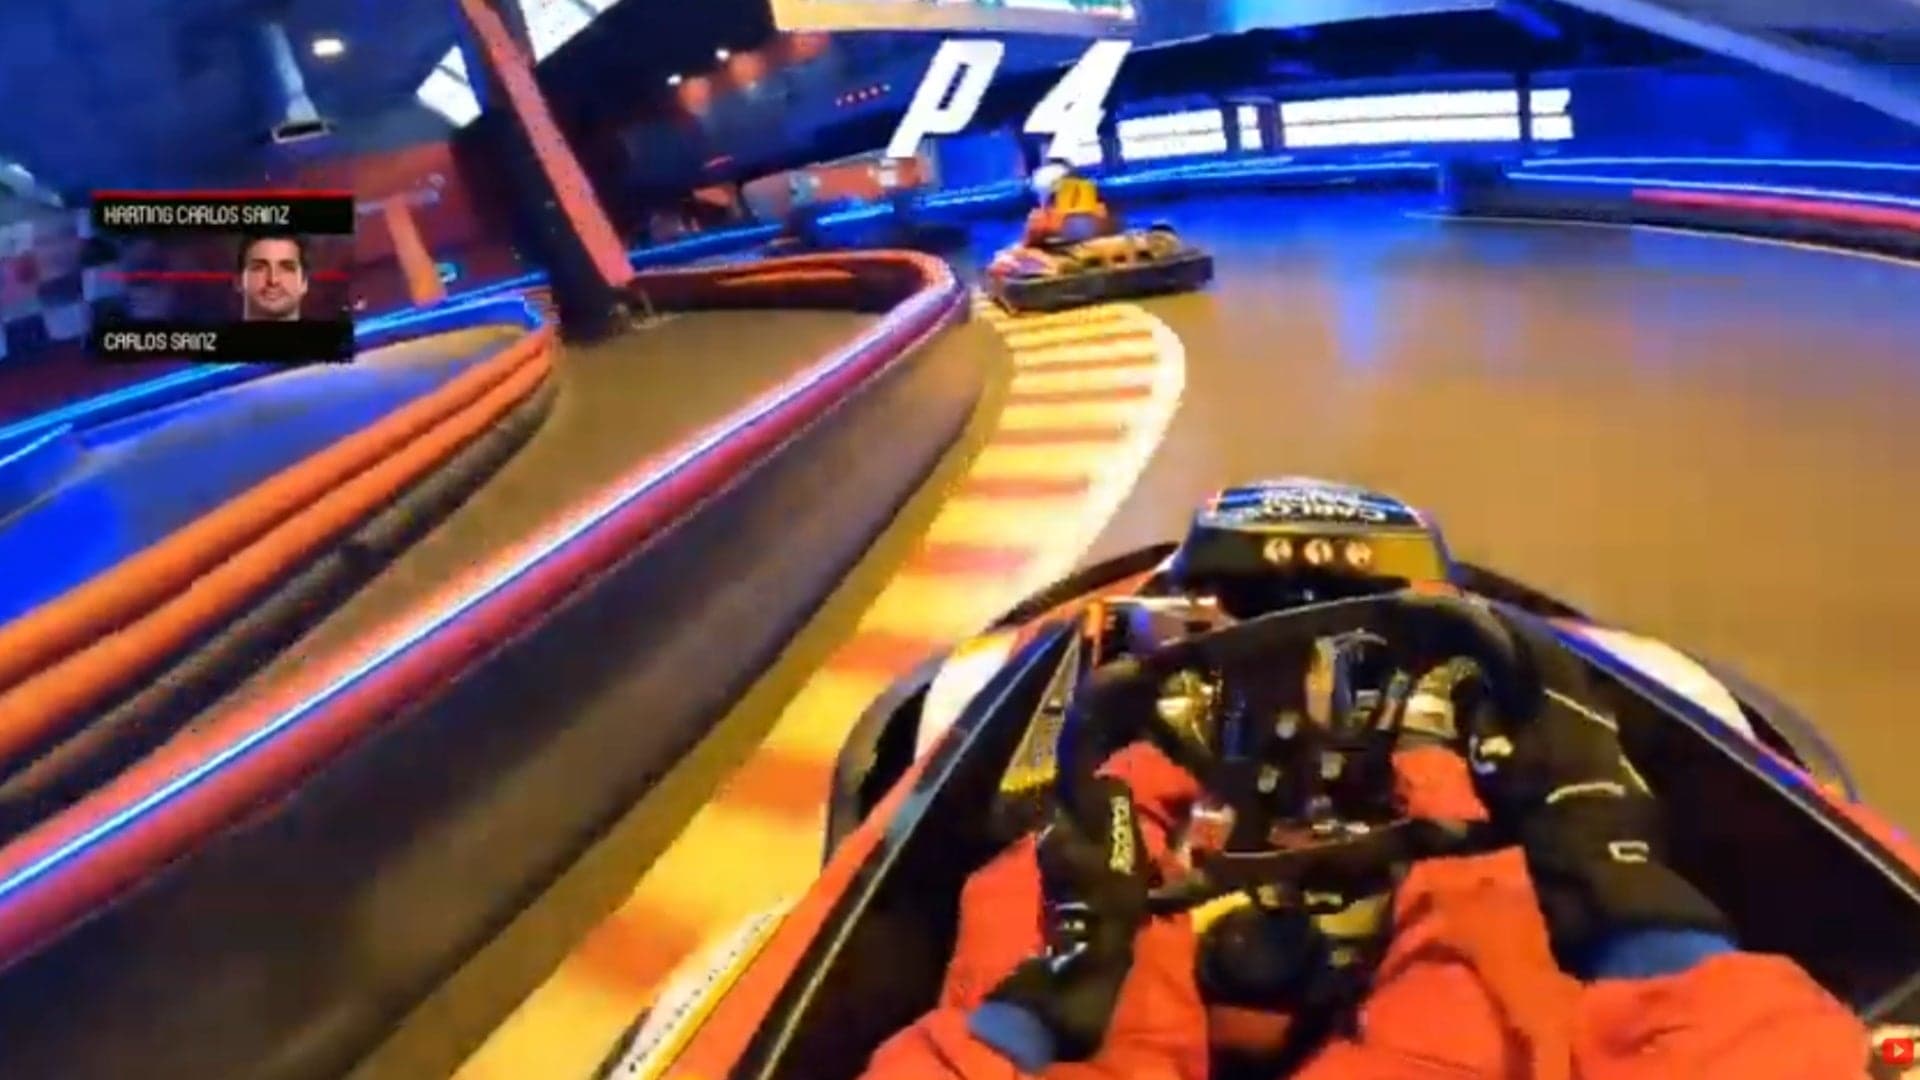 Watch Ferrari F1 Driver Carlos Sainz Hustle From Last to First in an Indoor Go-Kart Race